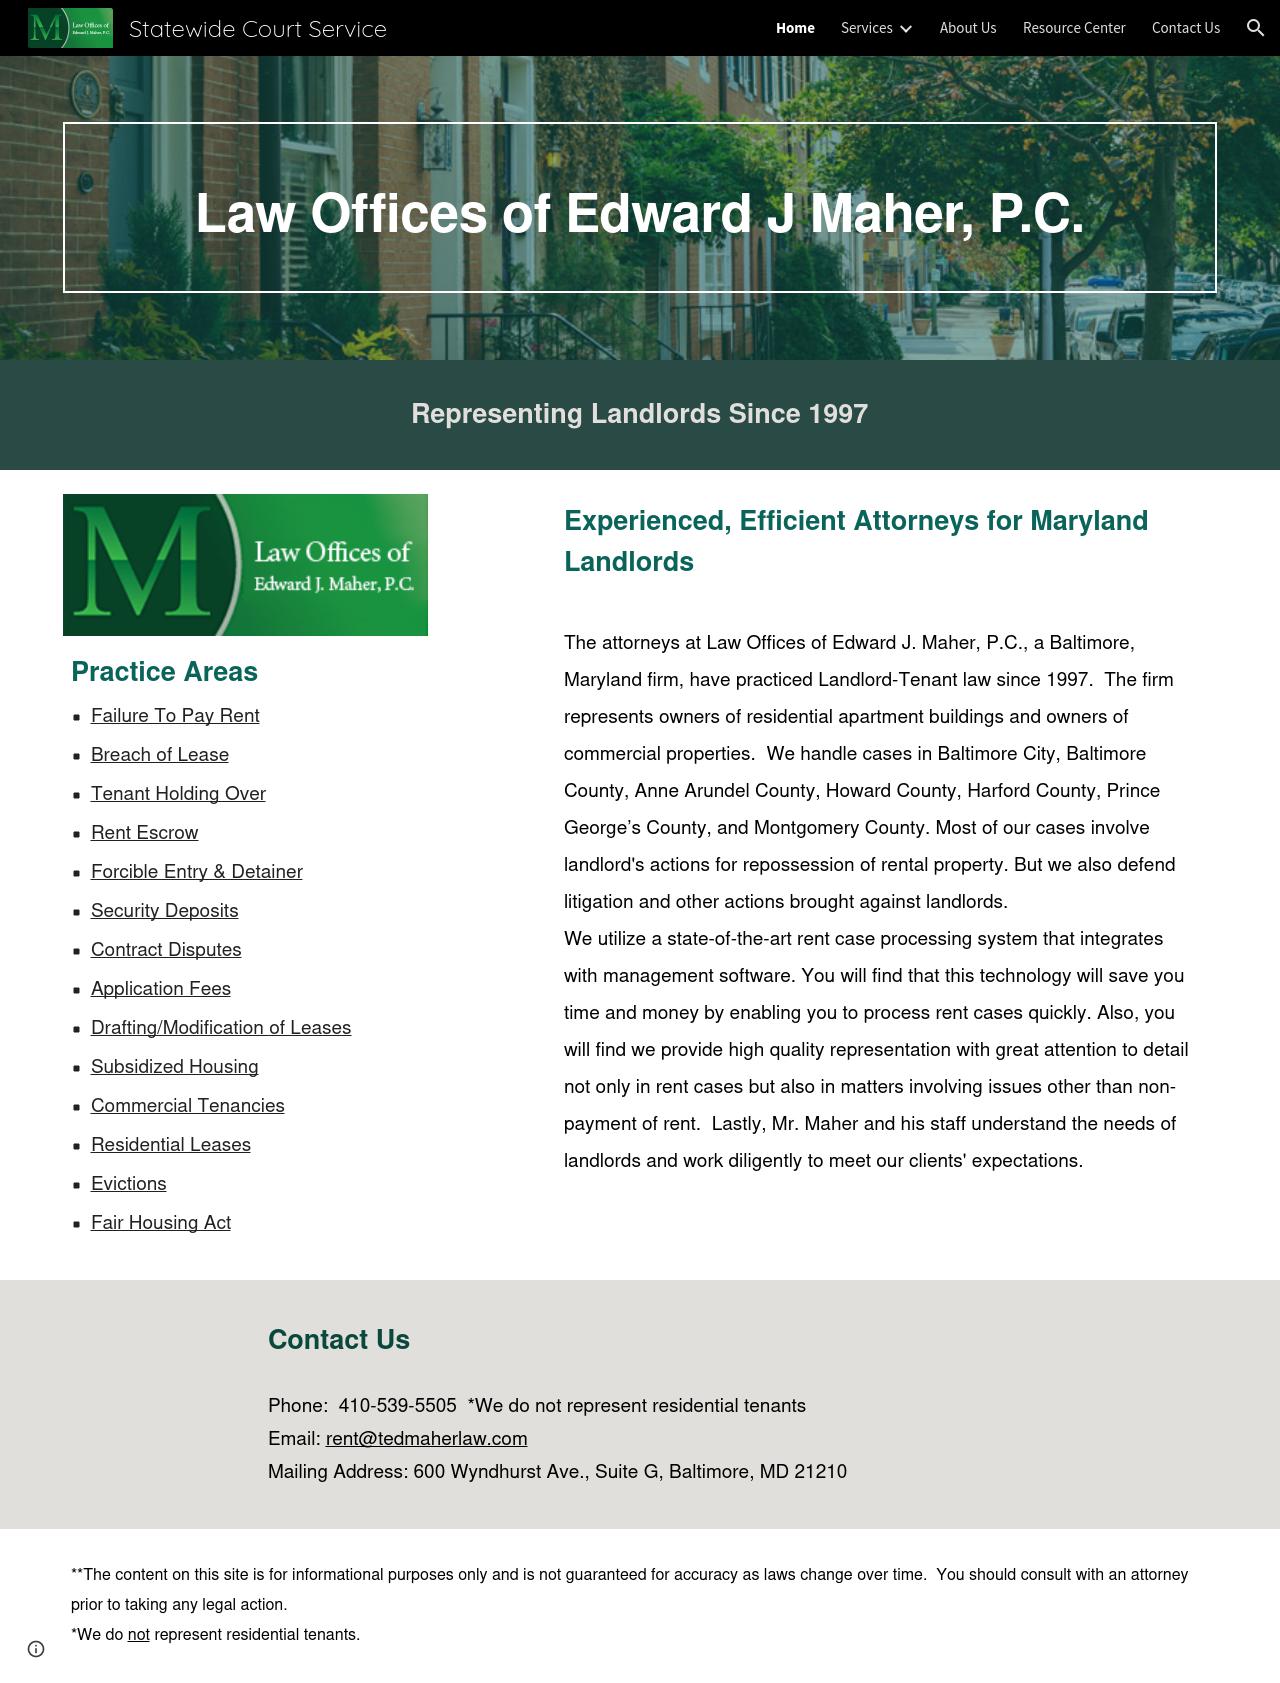 Law Offices of Edward J. Maher, P.C. - Laurel MD Lawyers